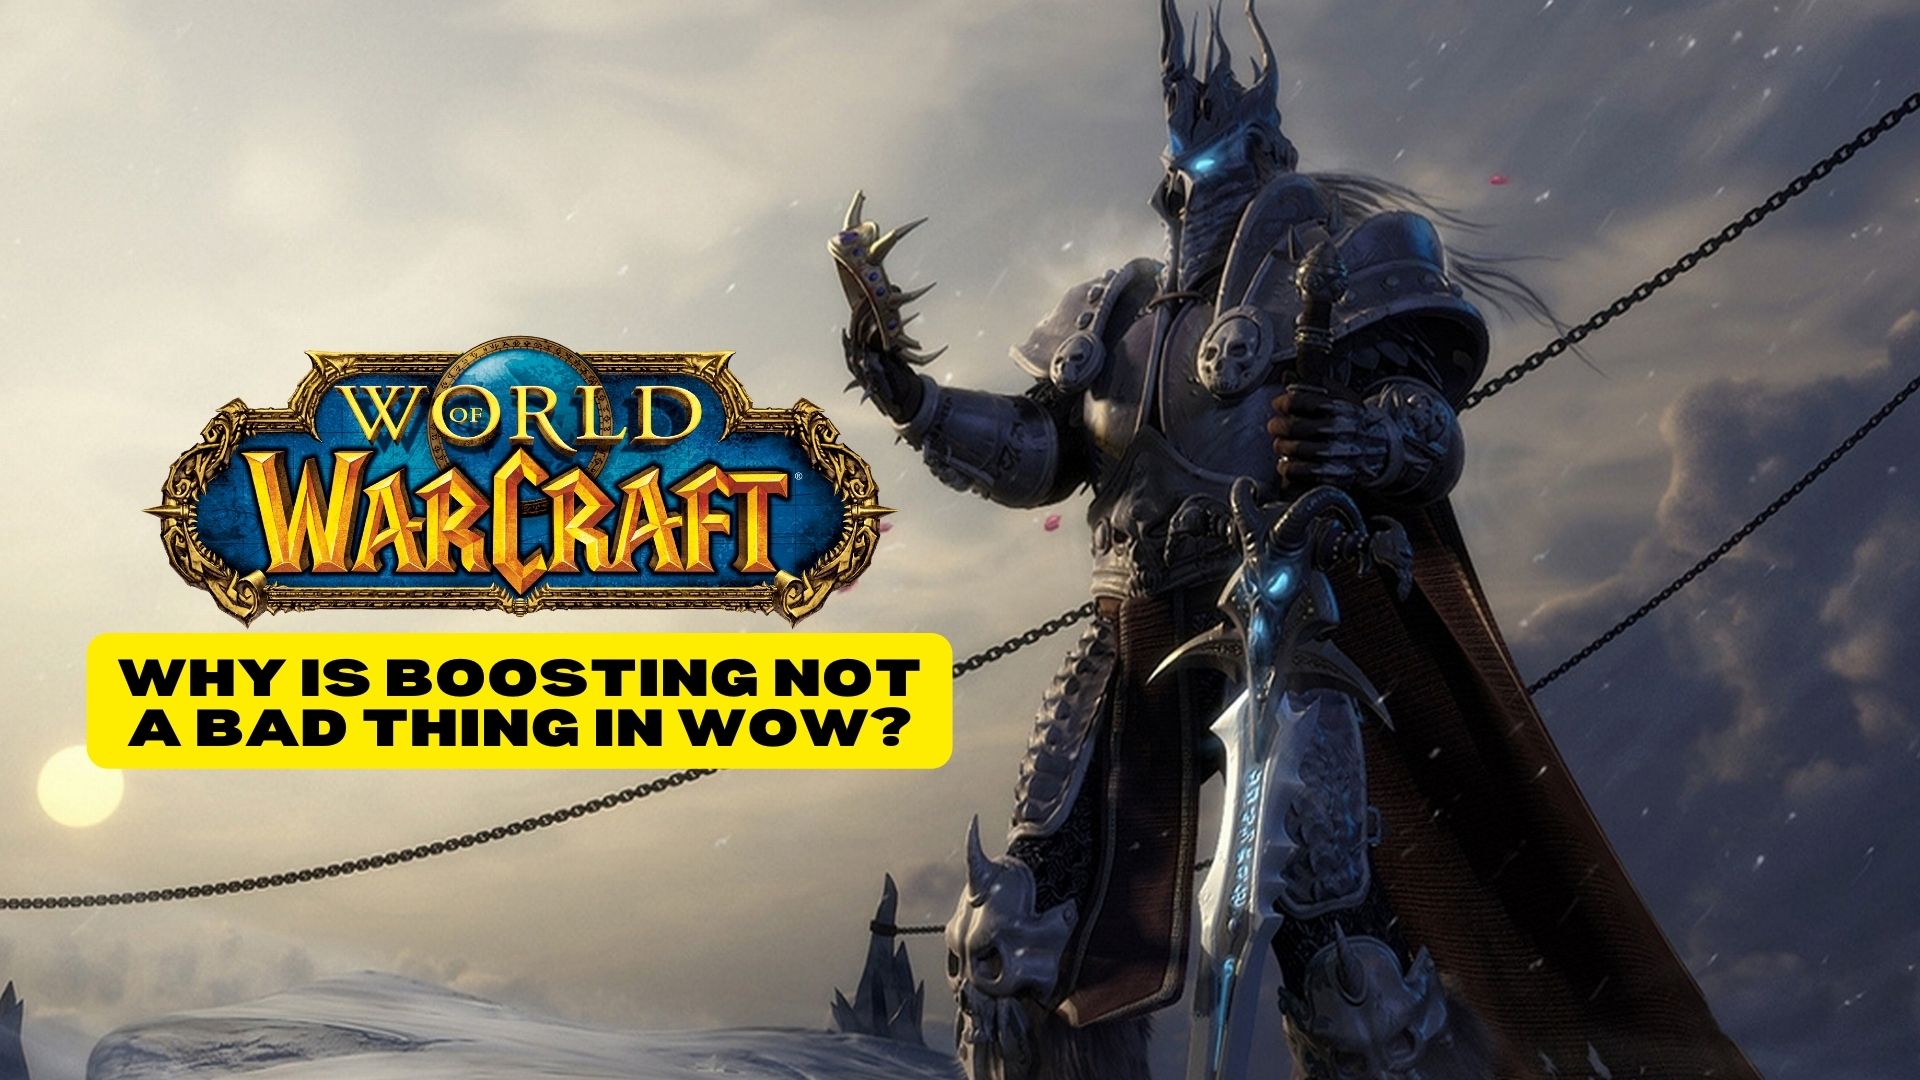 Why is boosting not a bad thing in WoW?